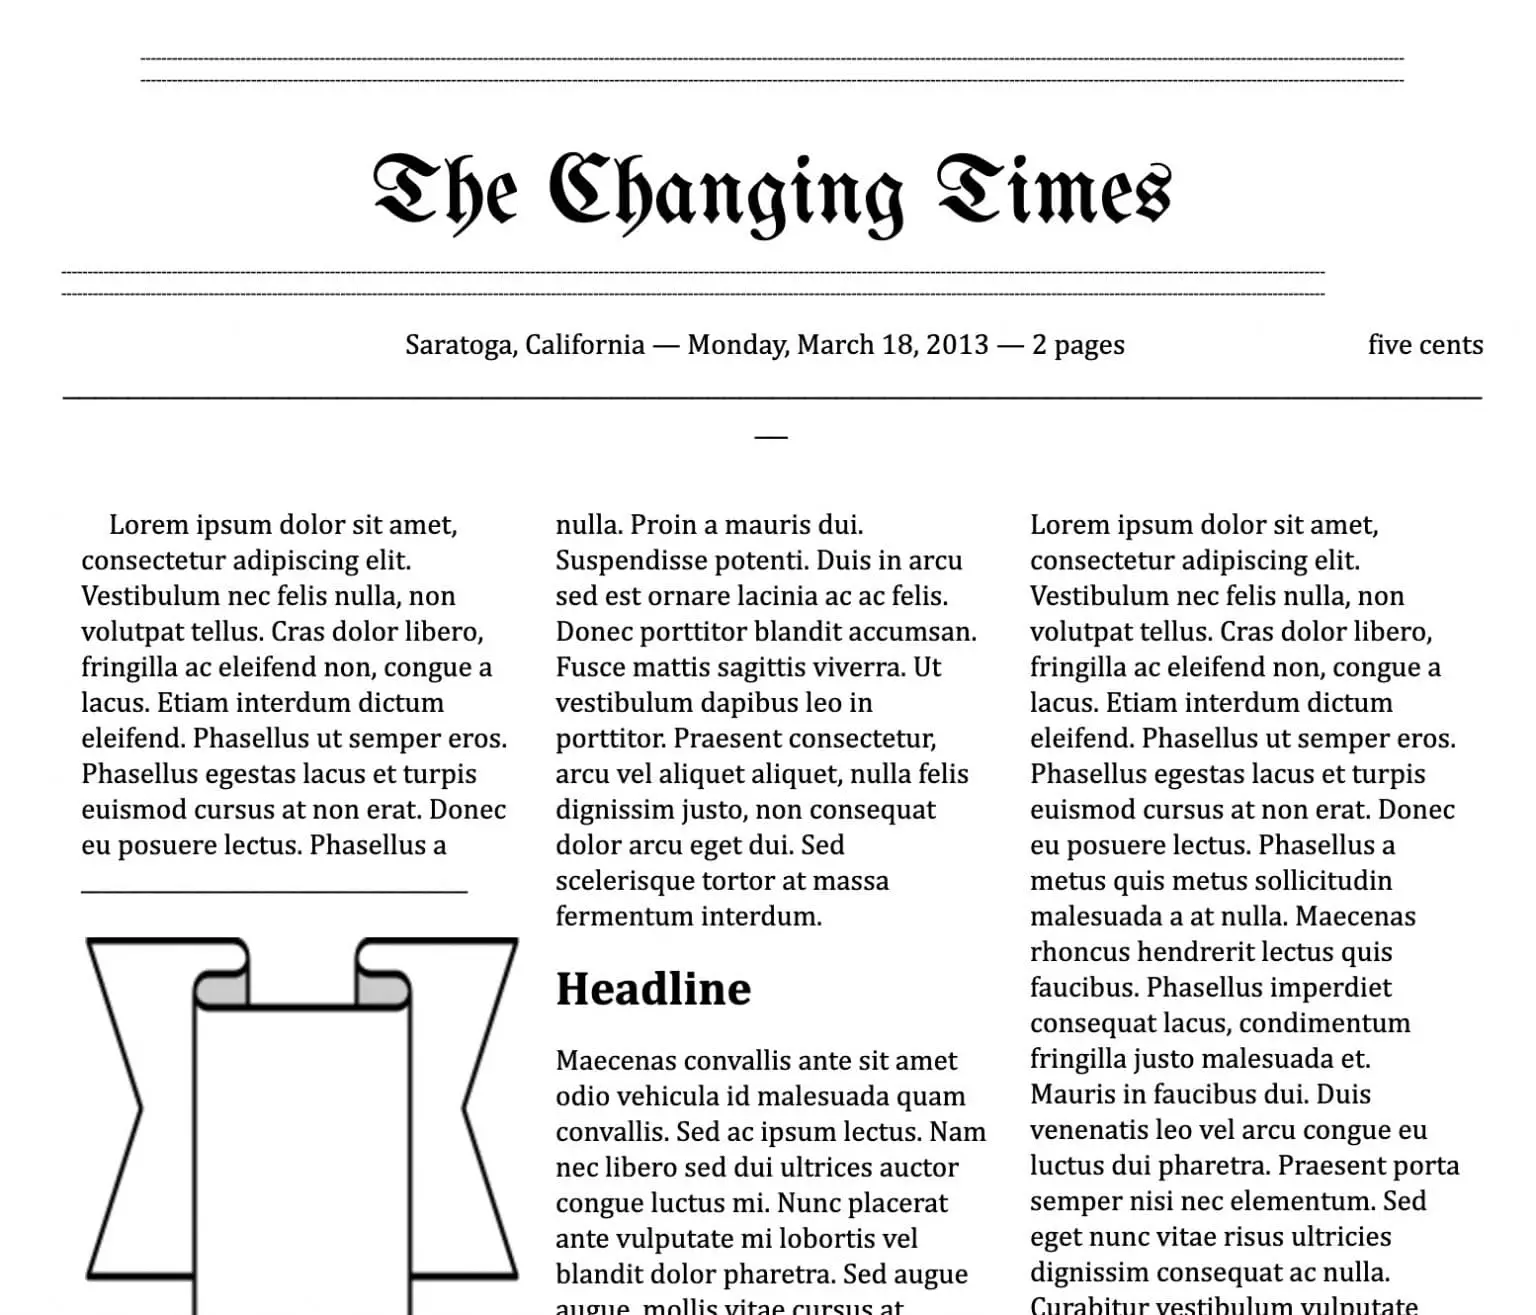 how to write a newspaper article in google docs